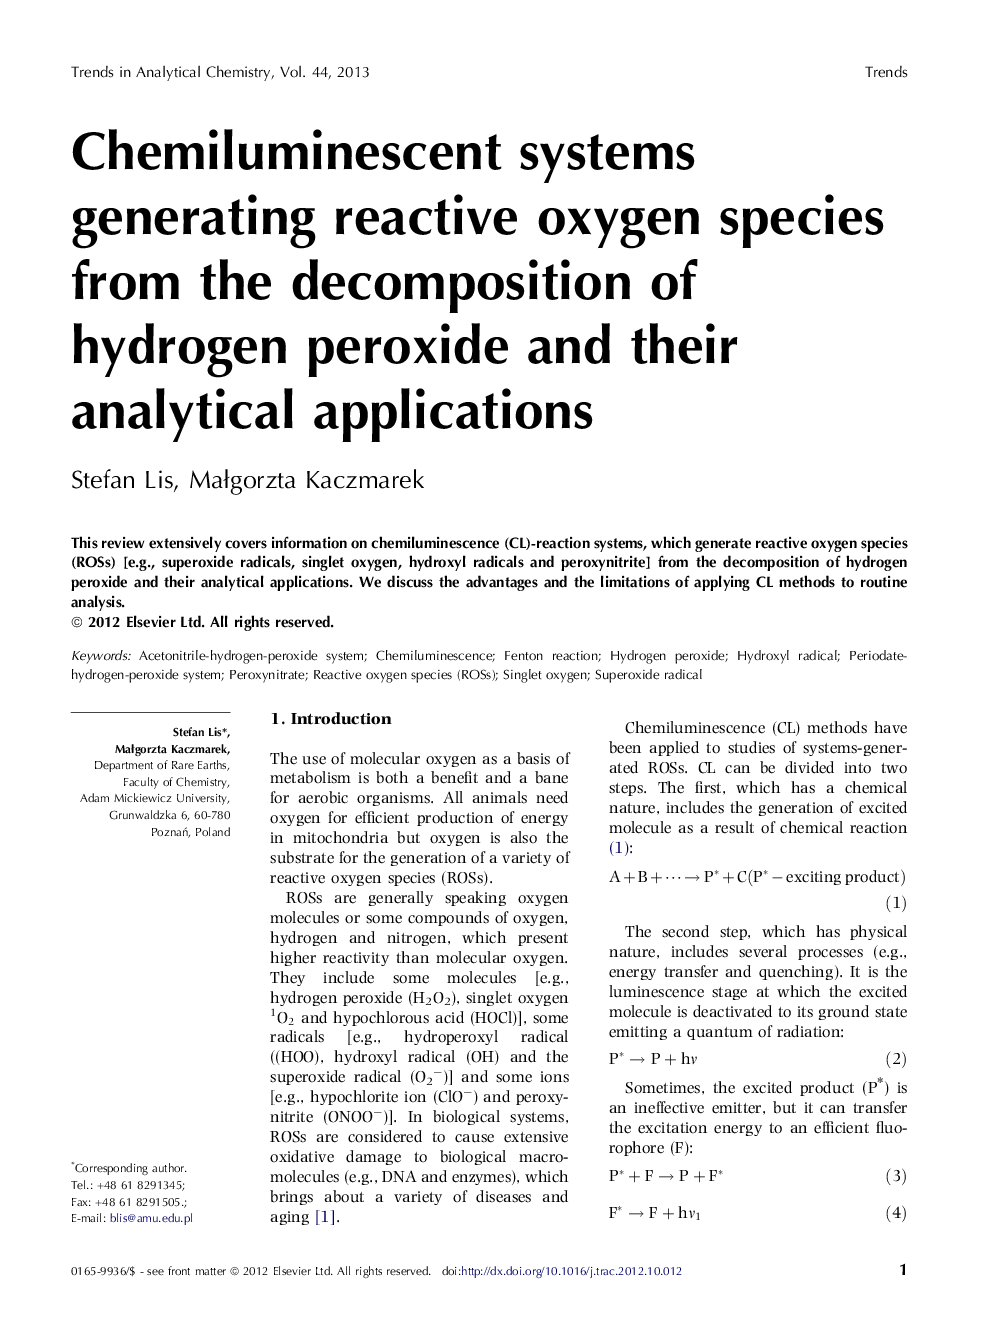 Chemiluminescent systems generating reactive oxygen species from the decomposition of hydrogen peroxide and their analytical applications